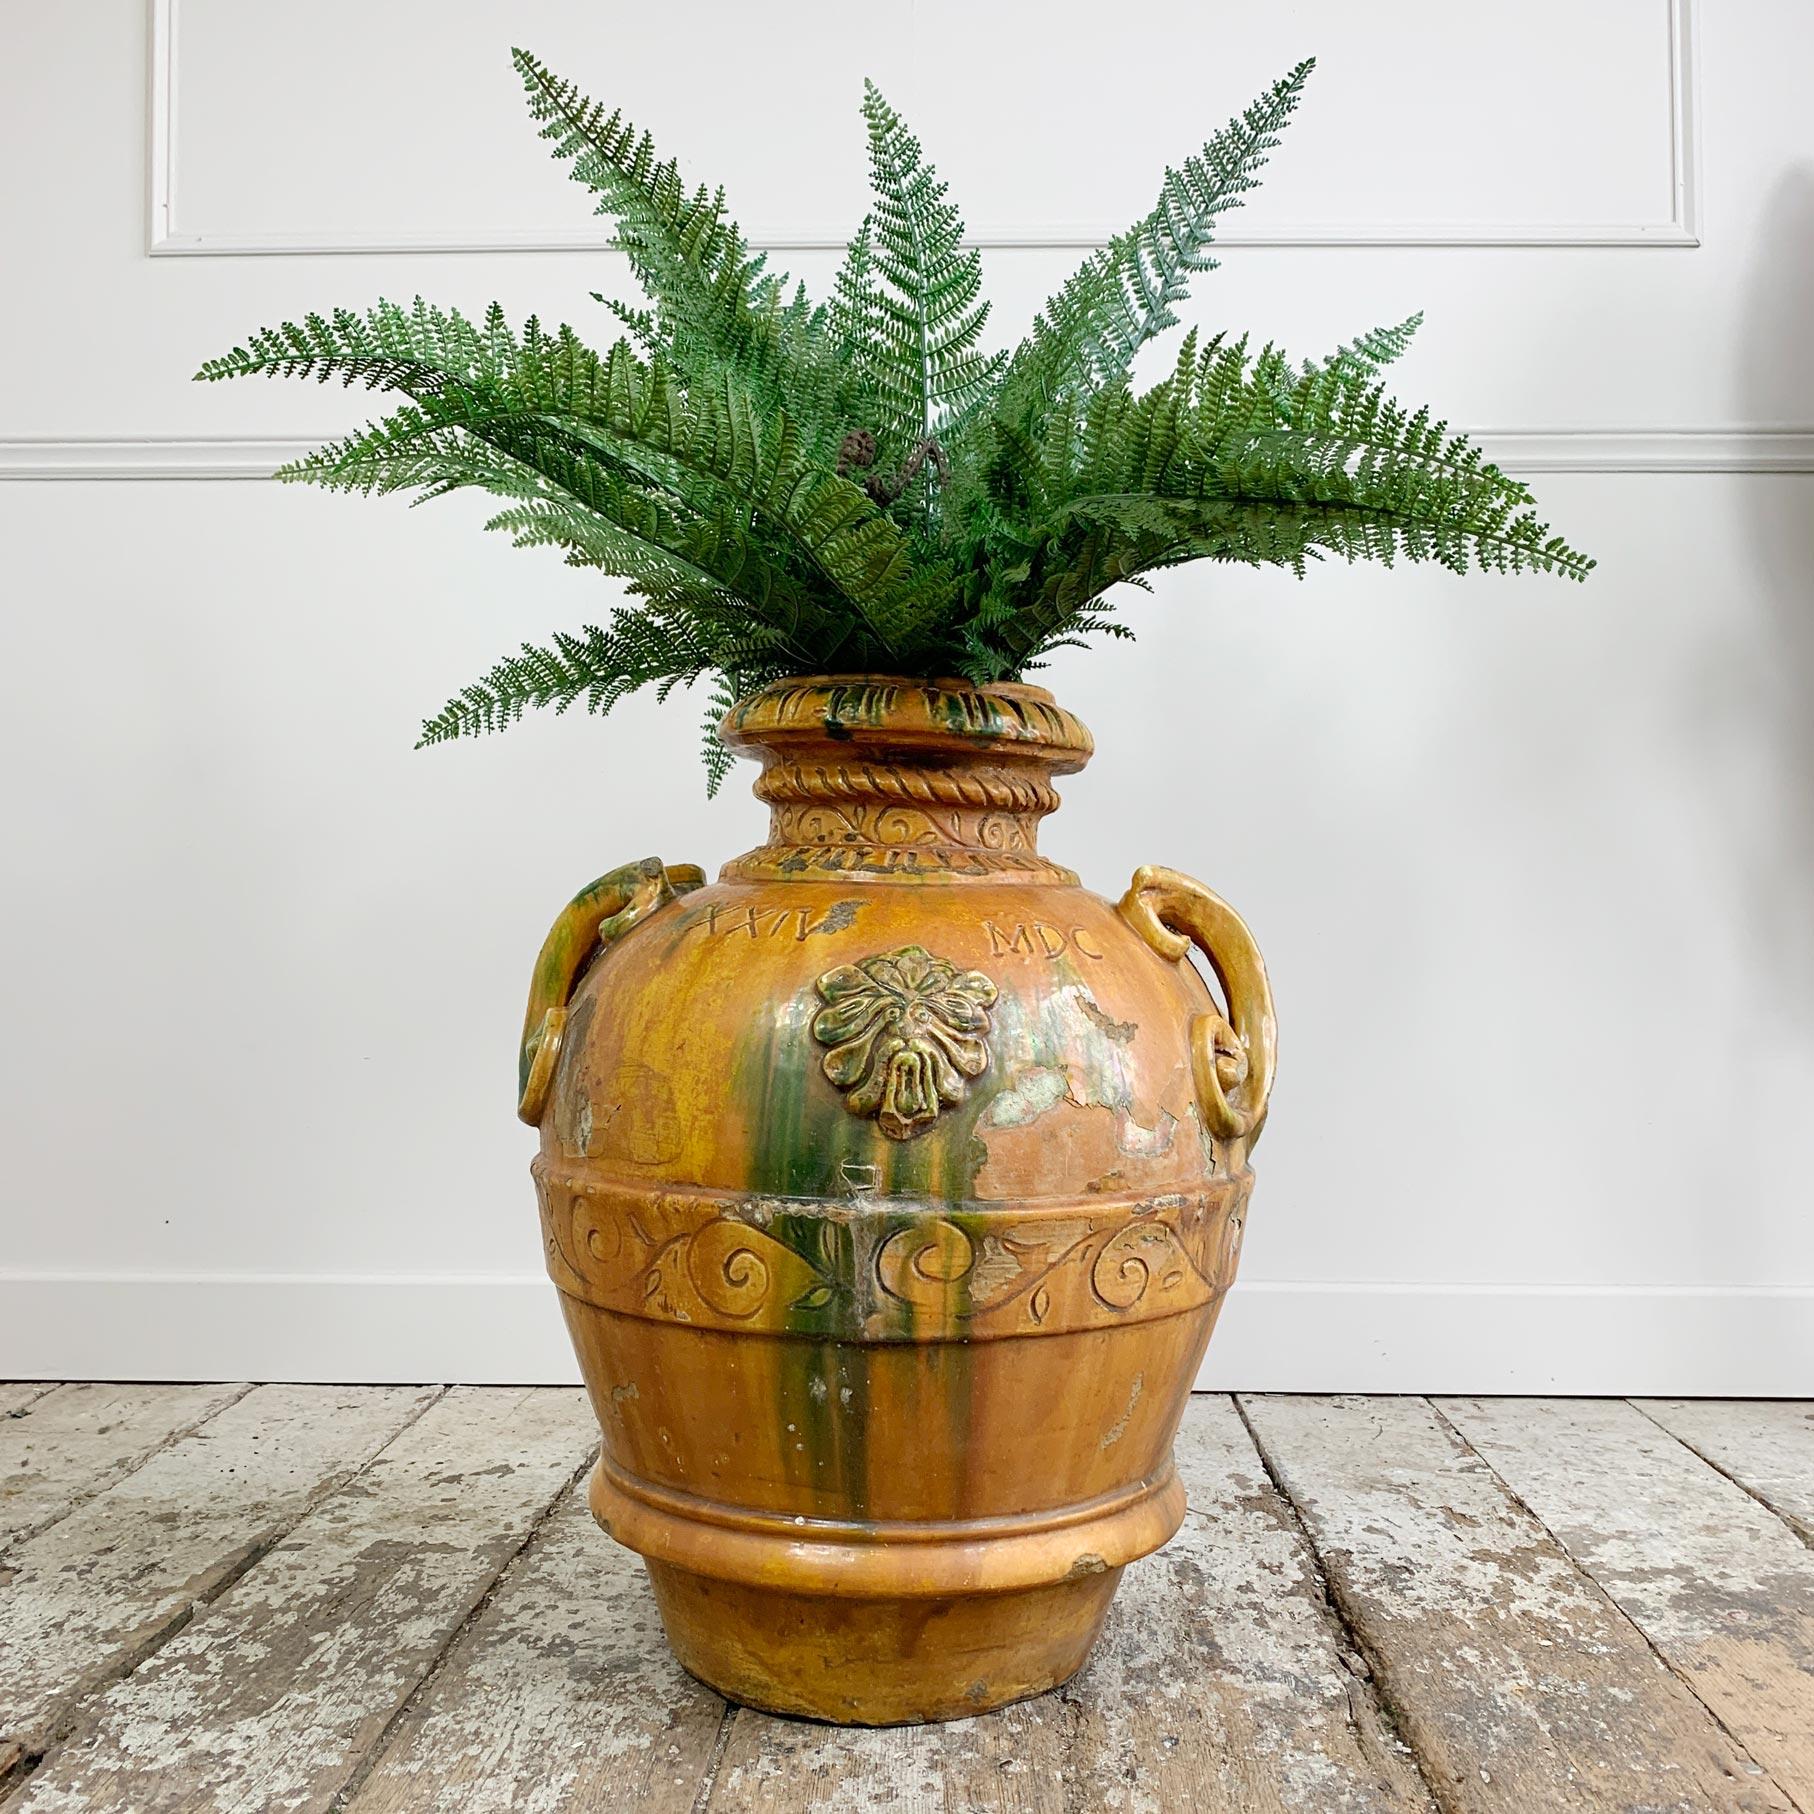 Dating to circa 1880 this exceptional Tuscan urn is decorated with incised design and has two large, scrolled handles. The applied face details to the side highlighted in green glaze over the deep orange/ochre body, the finish is almost